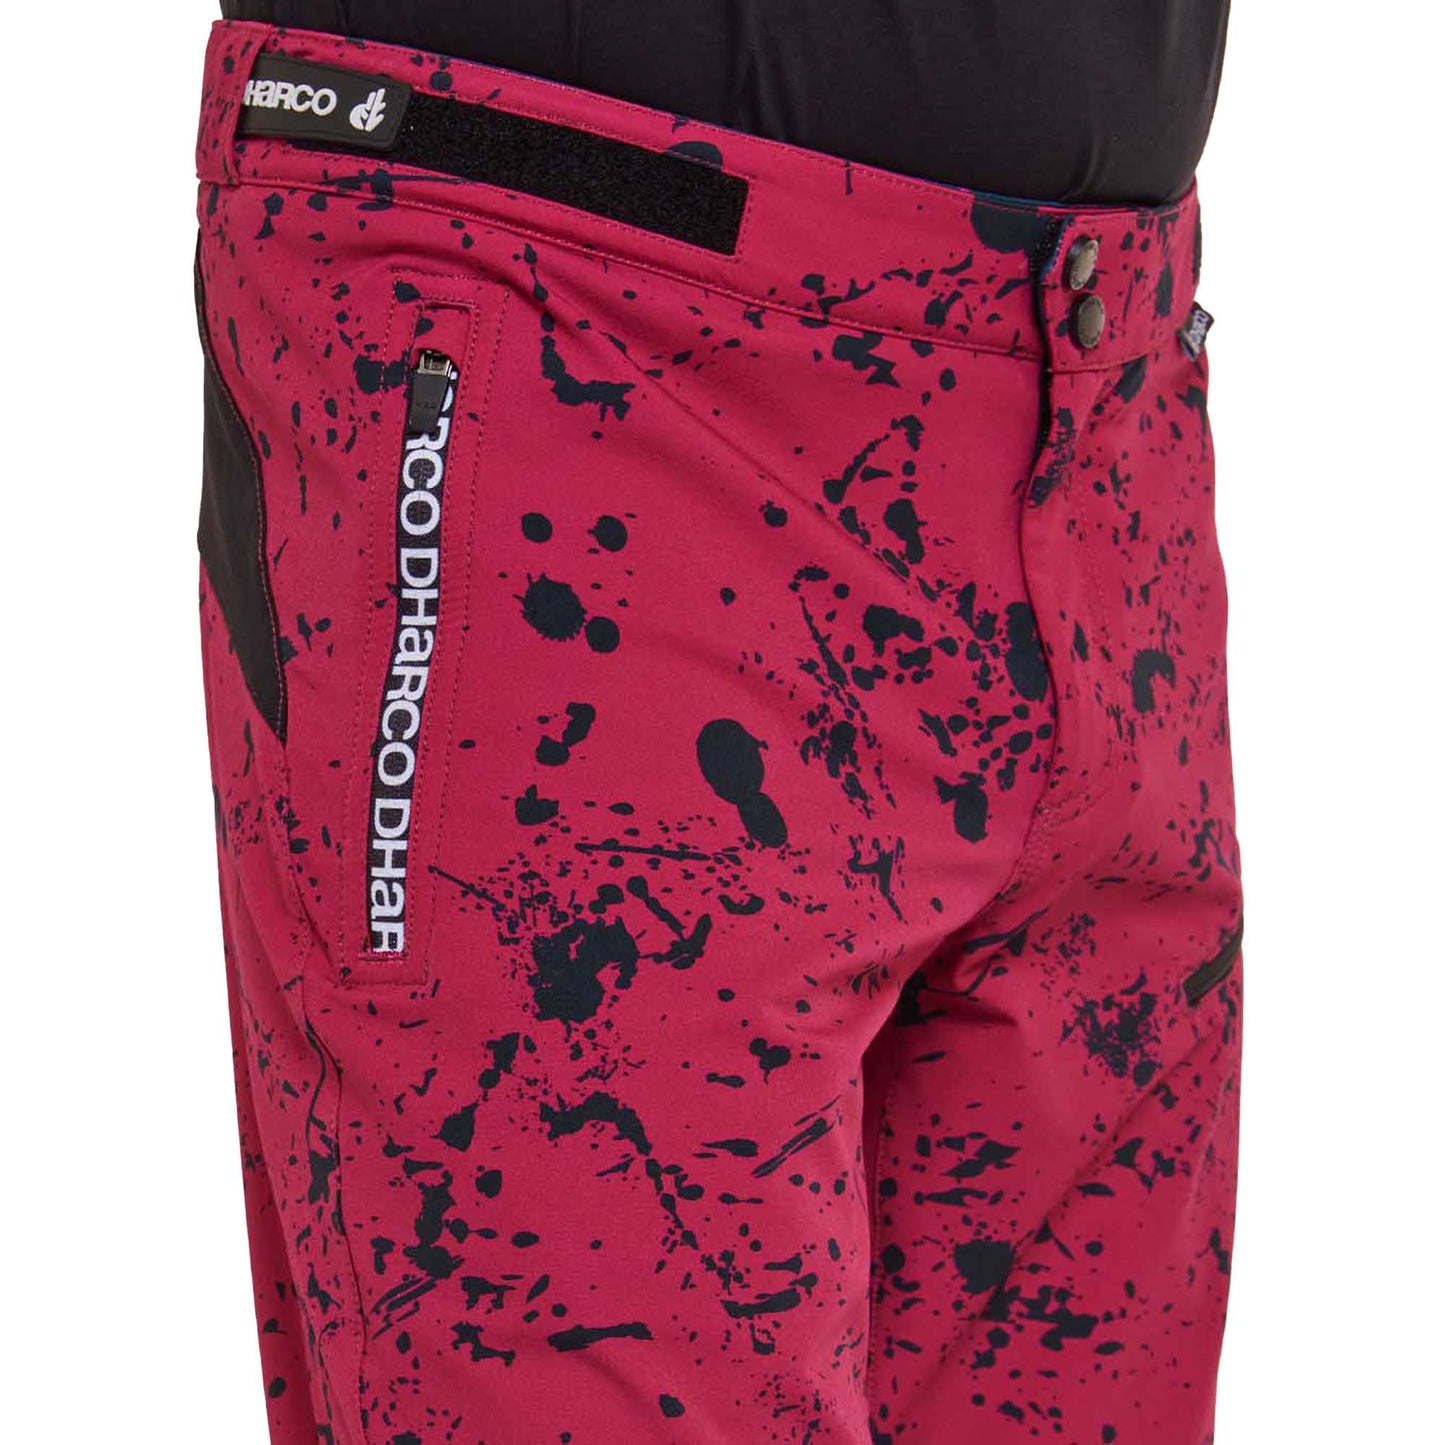 DHaRCO Men's Gravity Pants - S - Chili Peppers